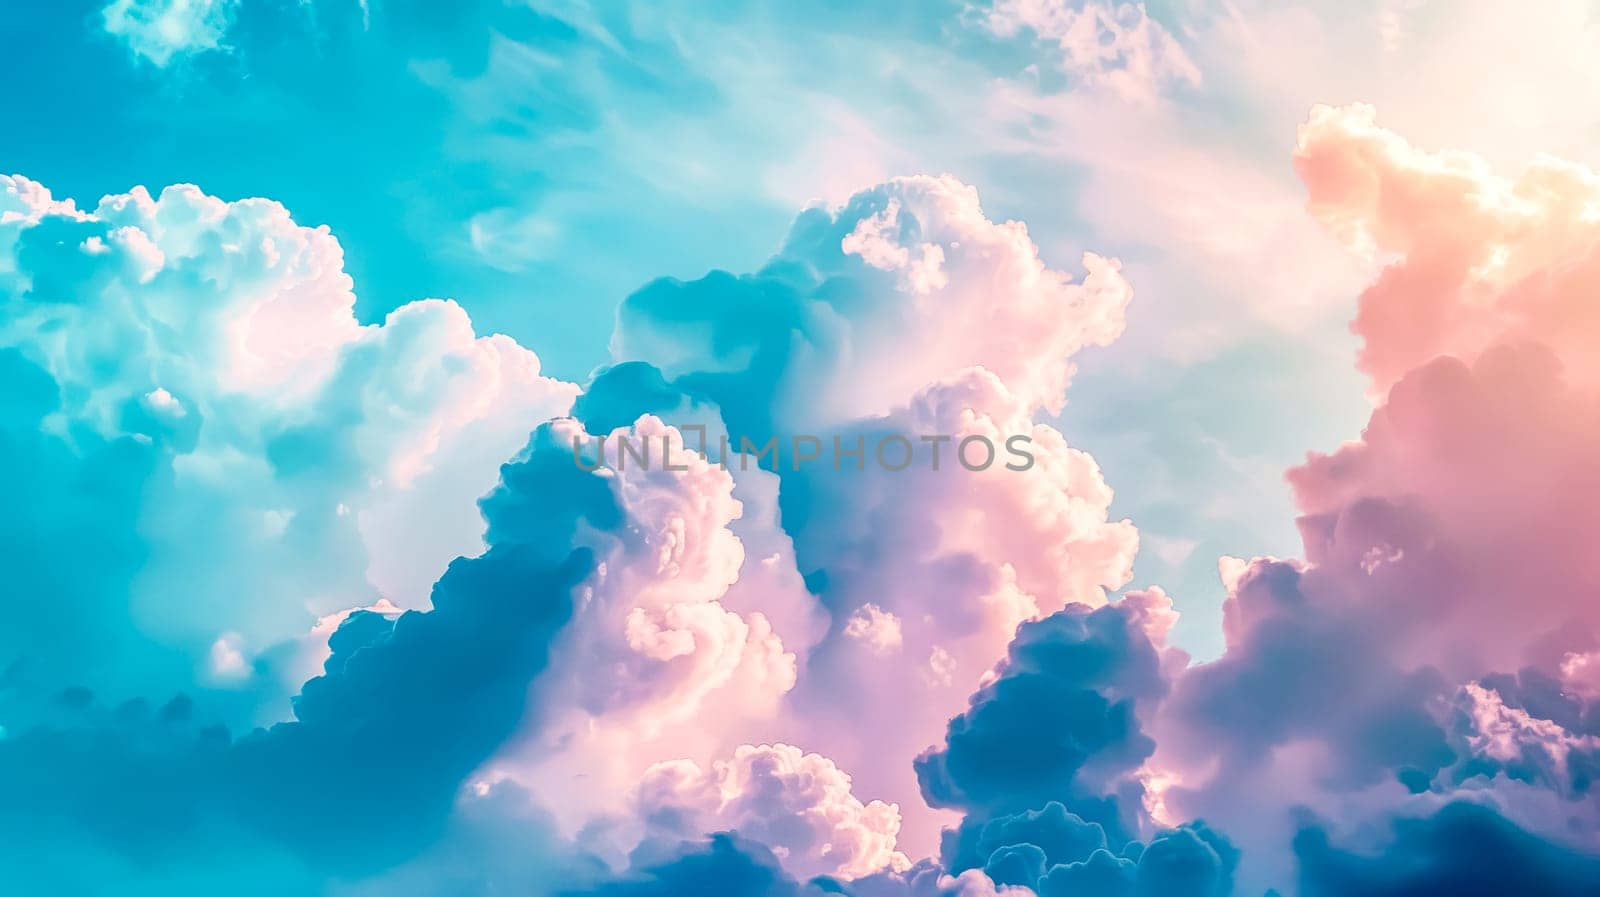 Serene pastel sky with fluffy clouds by Edophoto